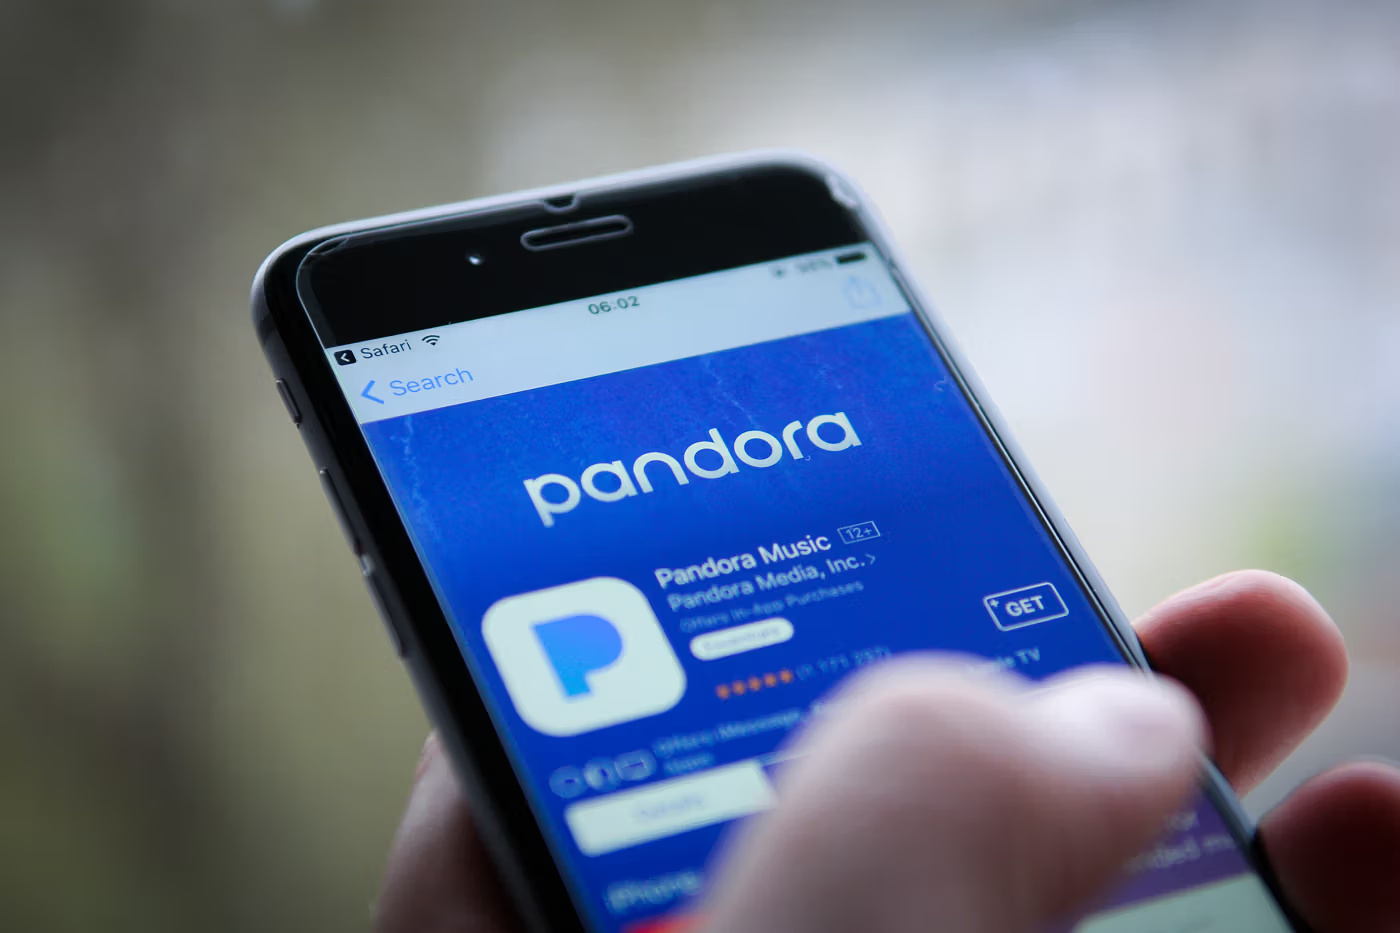 How Much Data Is Used For Streaming Pandora Music?